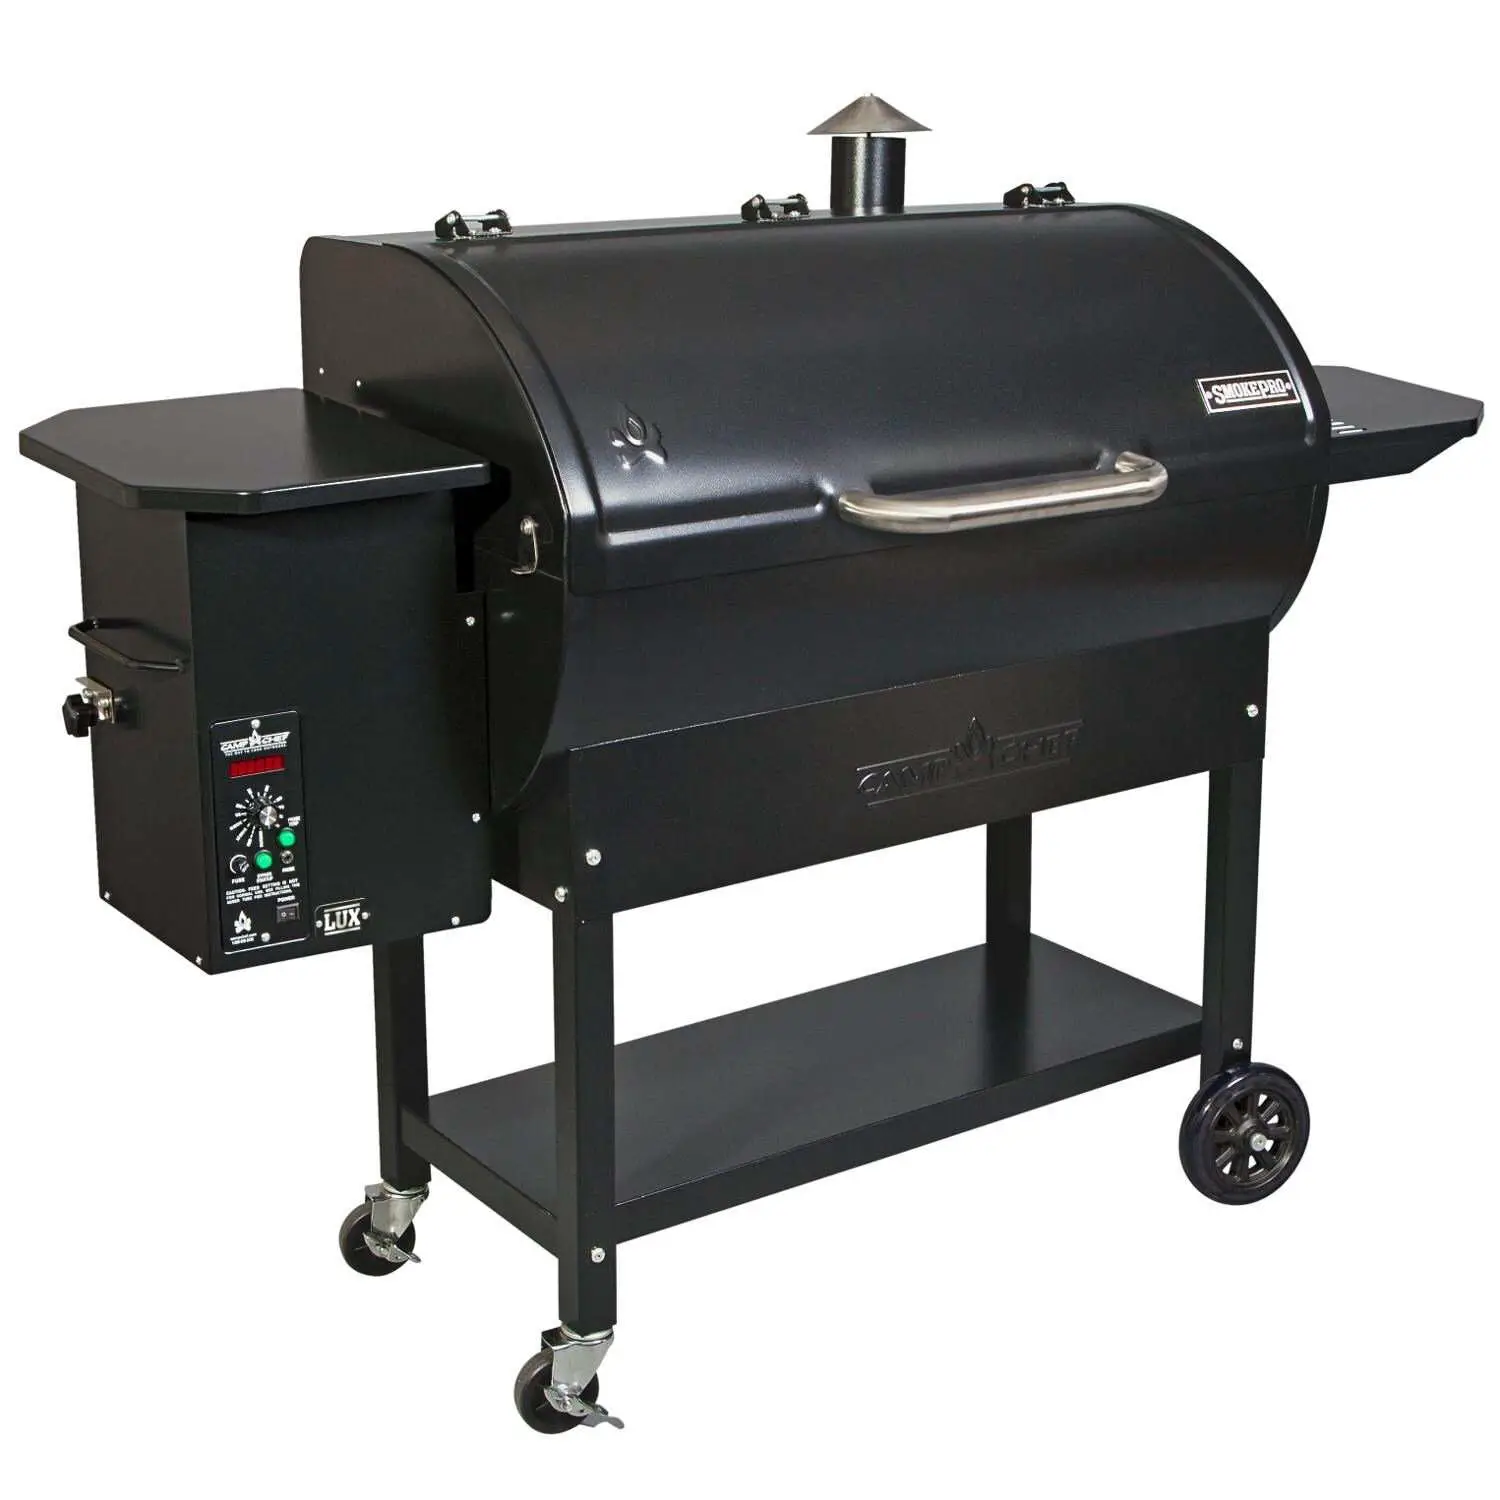 Camp Chef SmokePro LUX Wood Pellet Grill